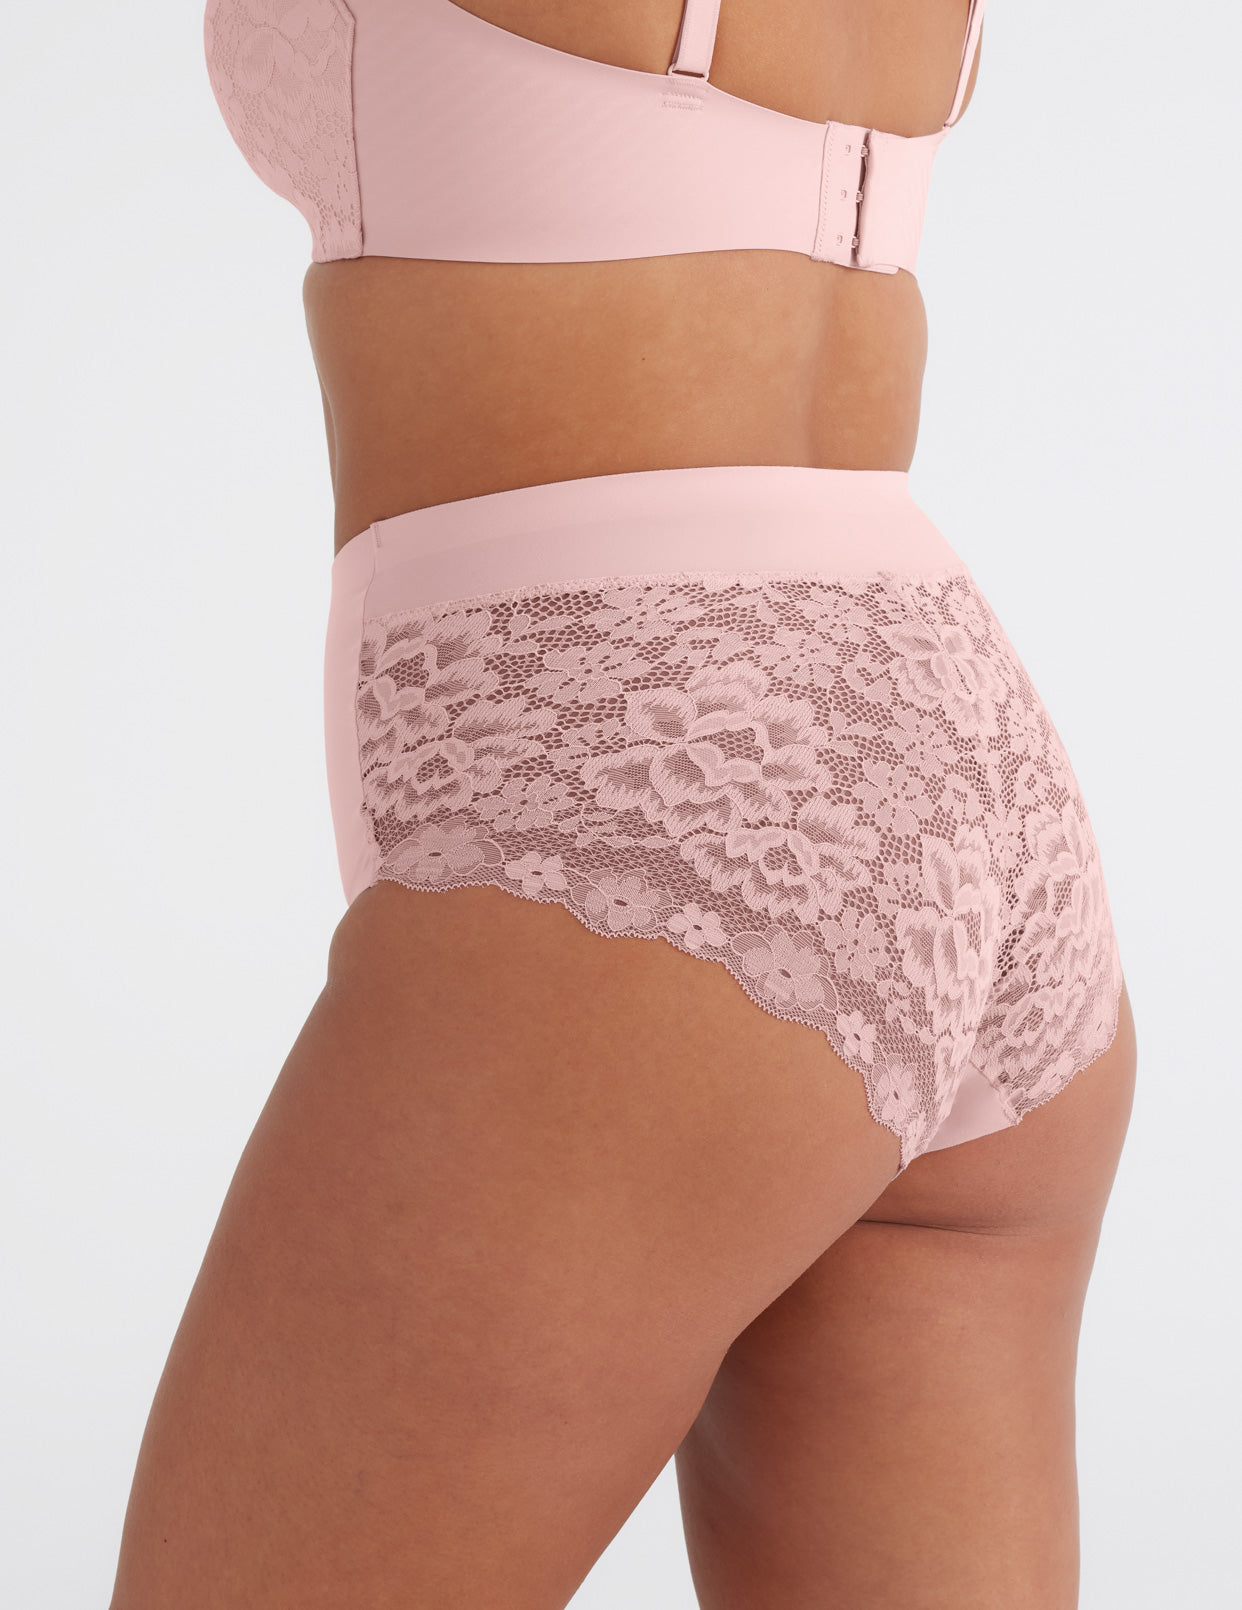 Lace Essential High Rise - Knix - Knix